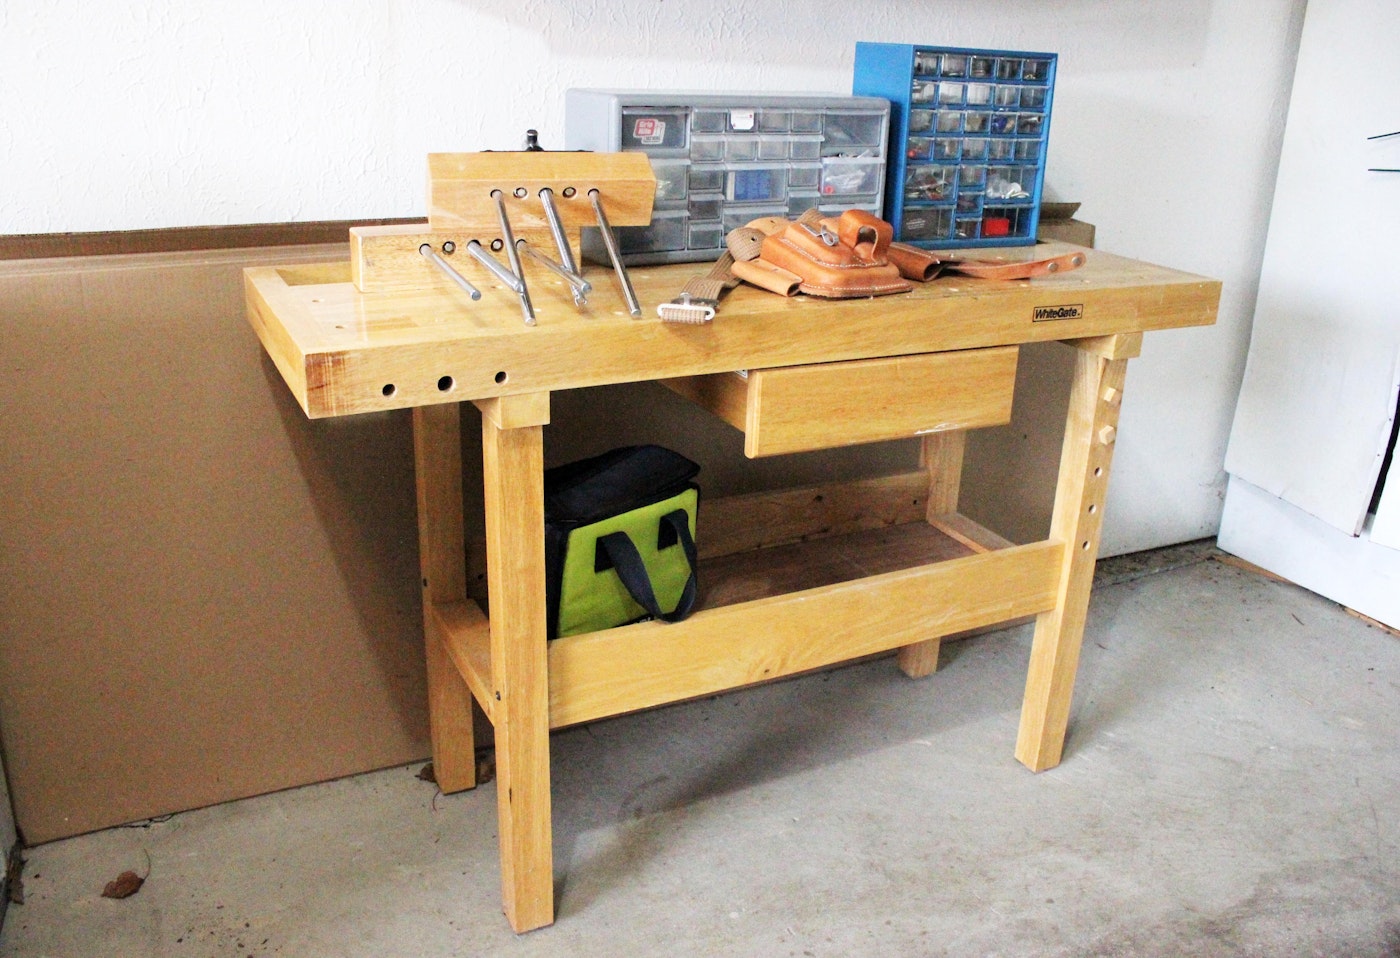 WhiteGate Workbench and Tools : EBTH